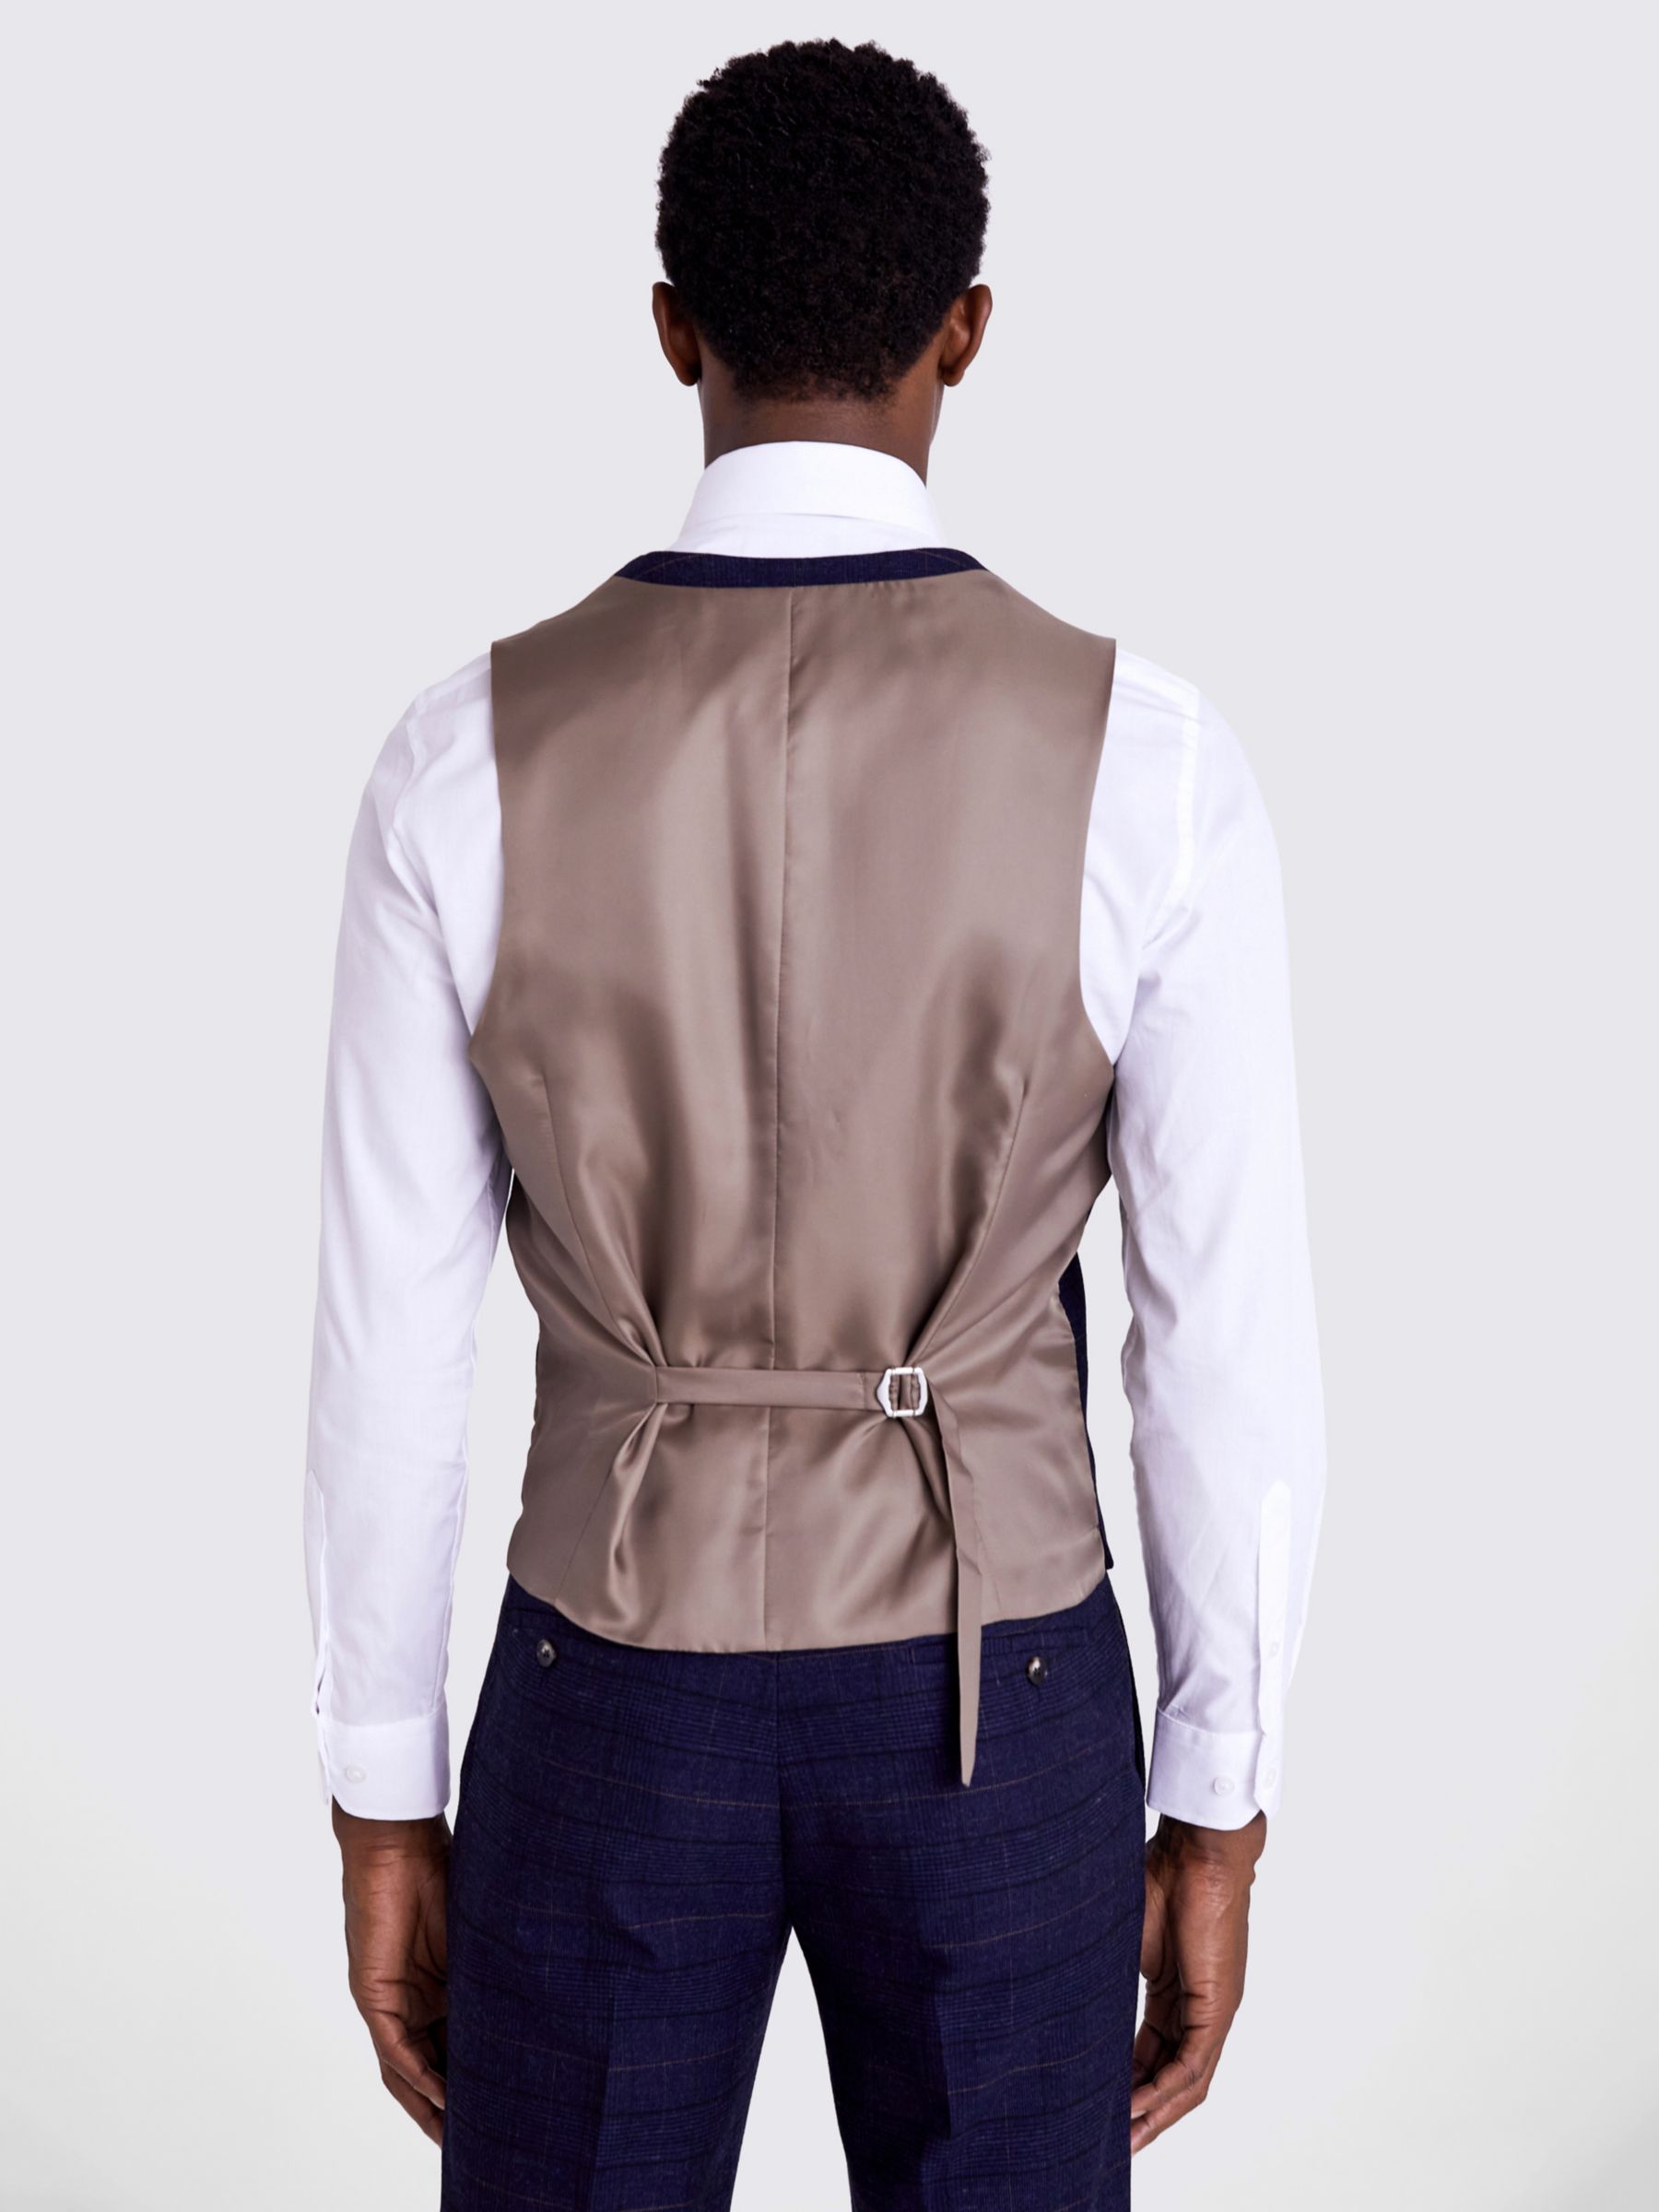 Moss Slim Fit Check Waistcoat, Navy/Taupe, 34R